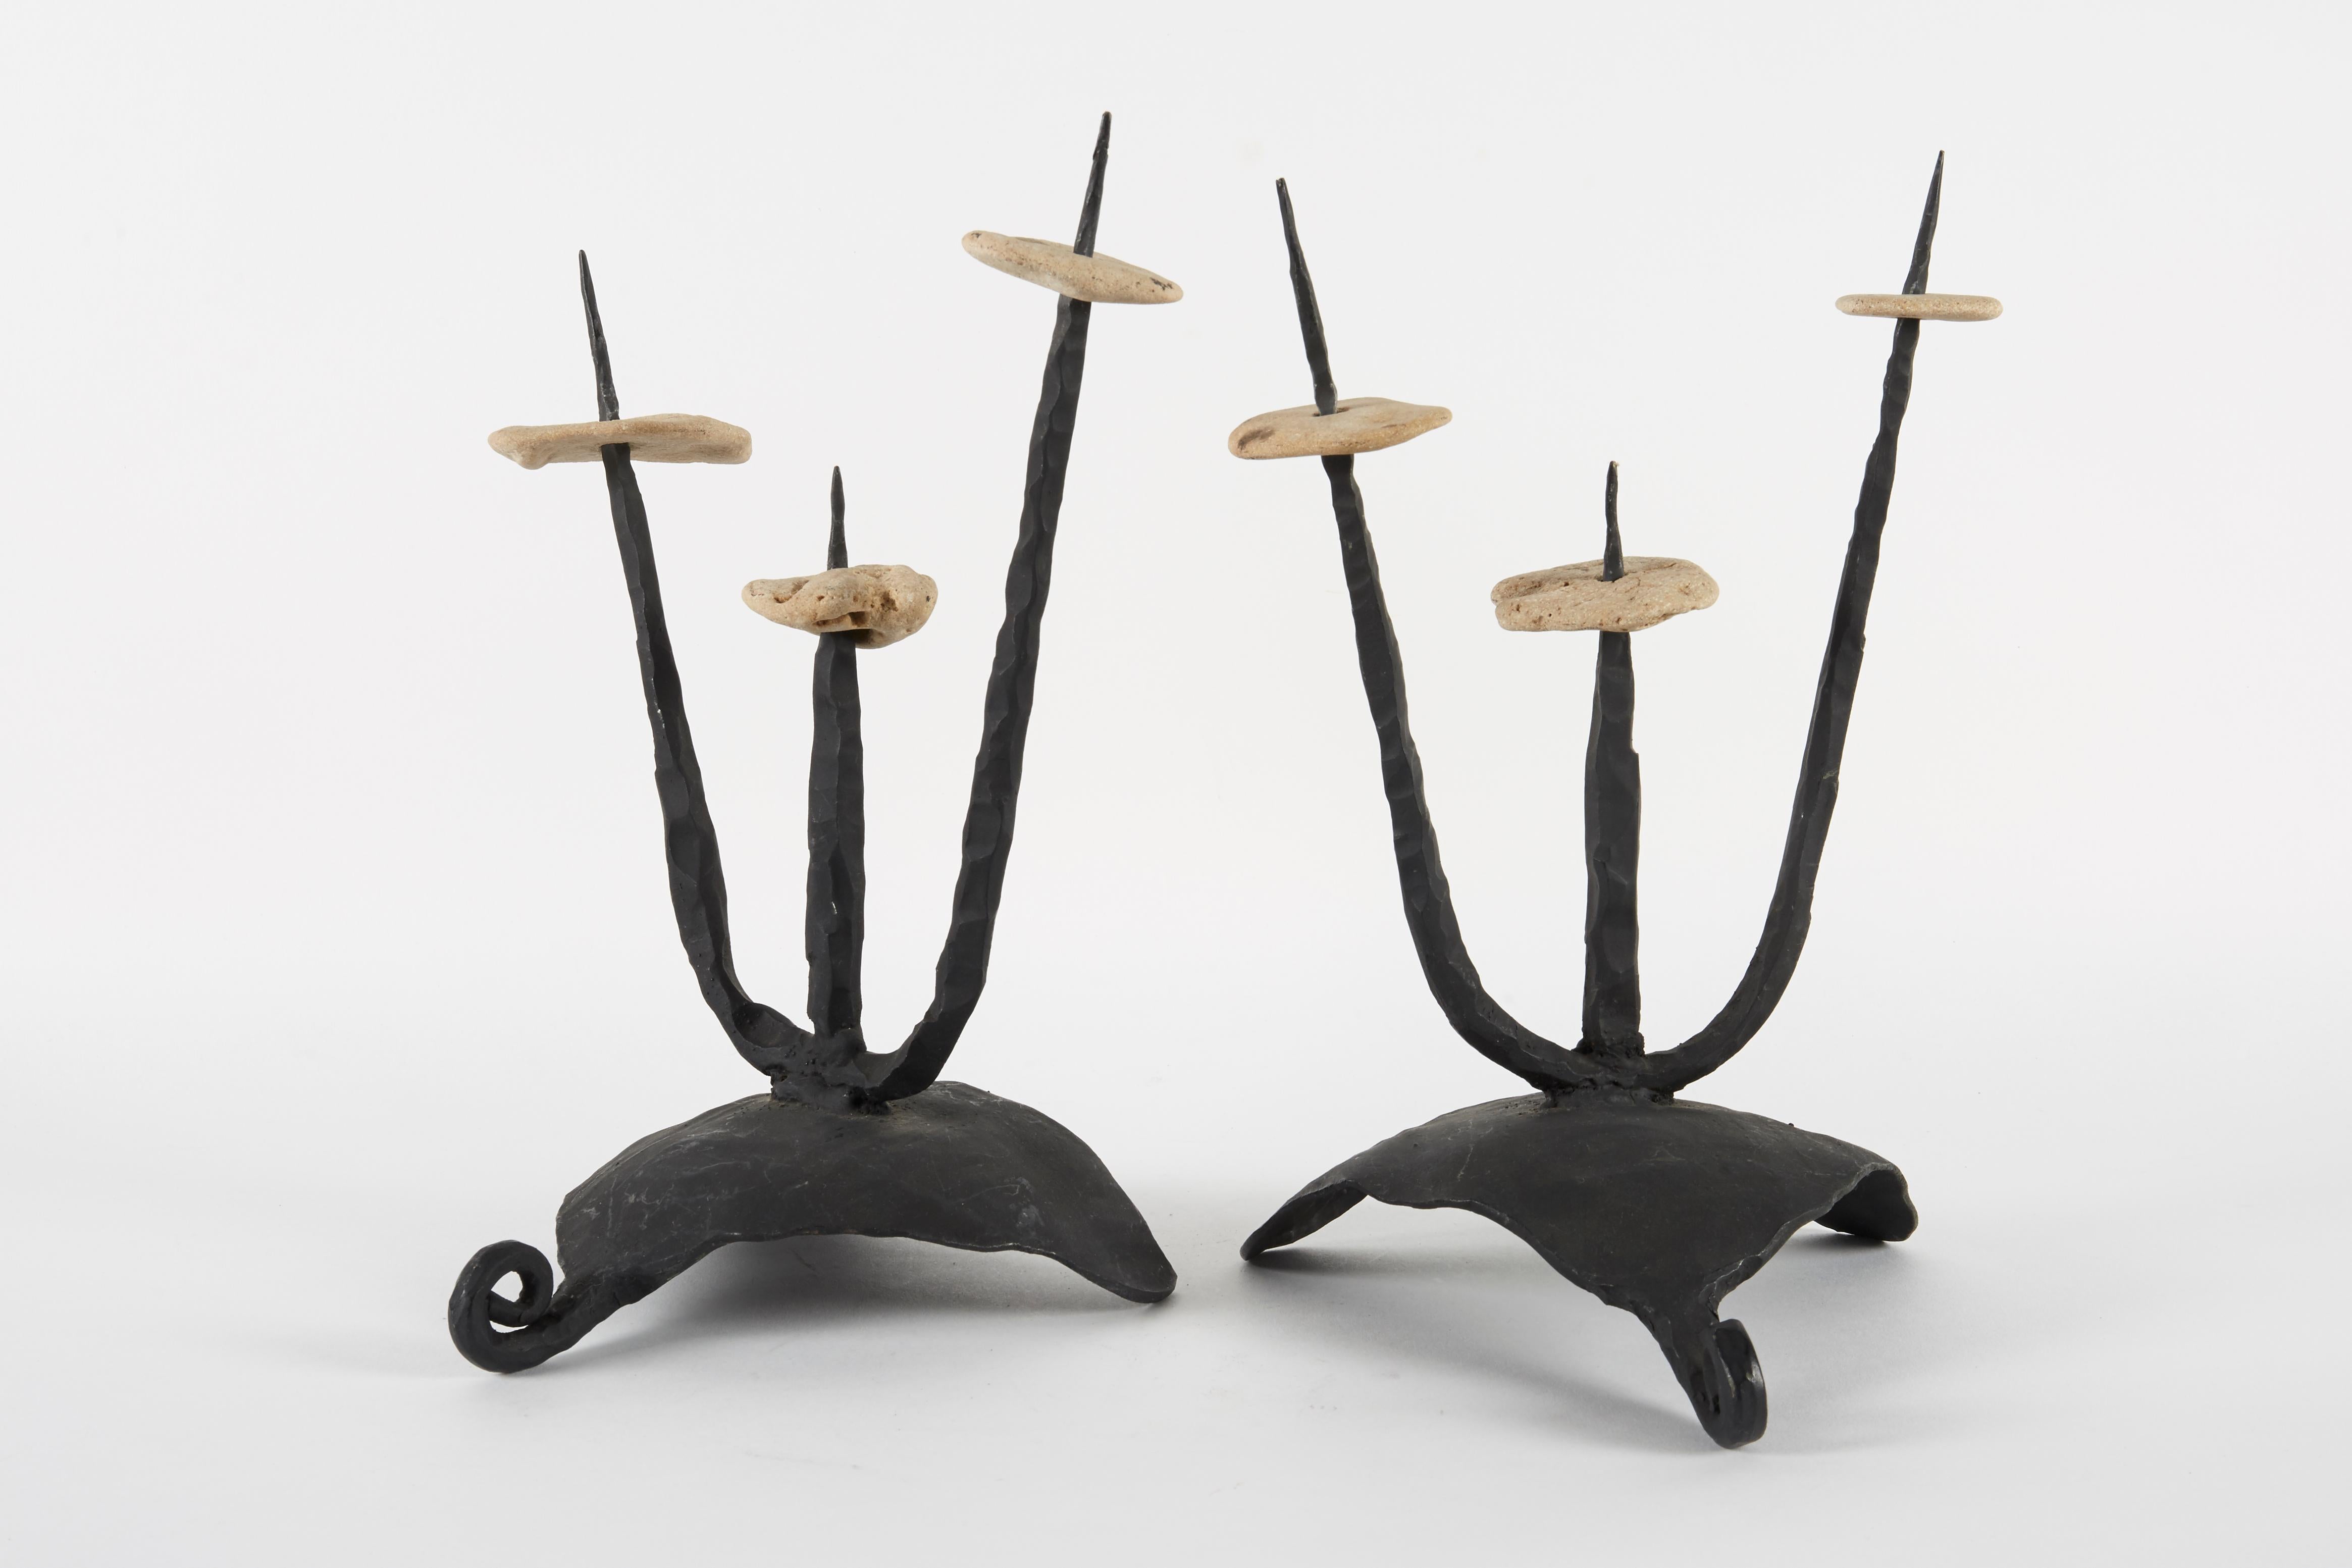 Stone Mid-20th Century Pair of Brutalist Candleholders/Sculptures by David Palombo For Sale